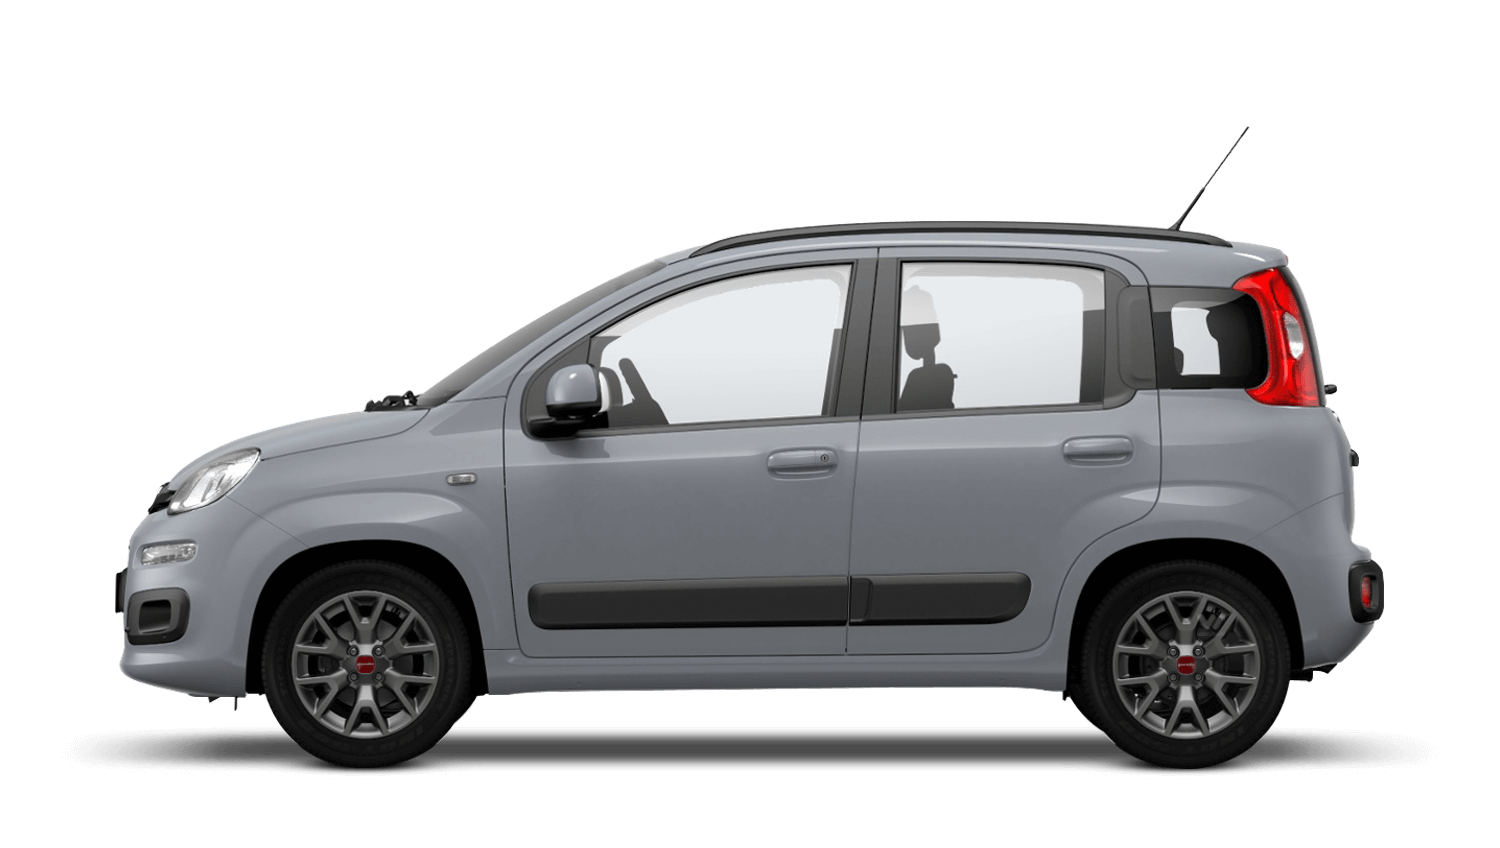 Fiat Car Fiorino Free Clipart HD PNG Image